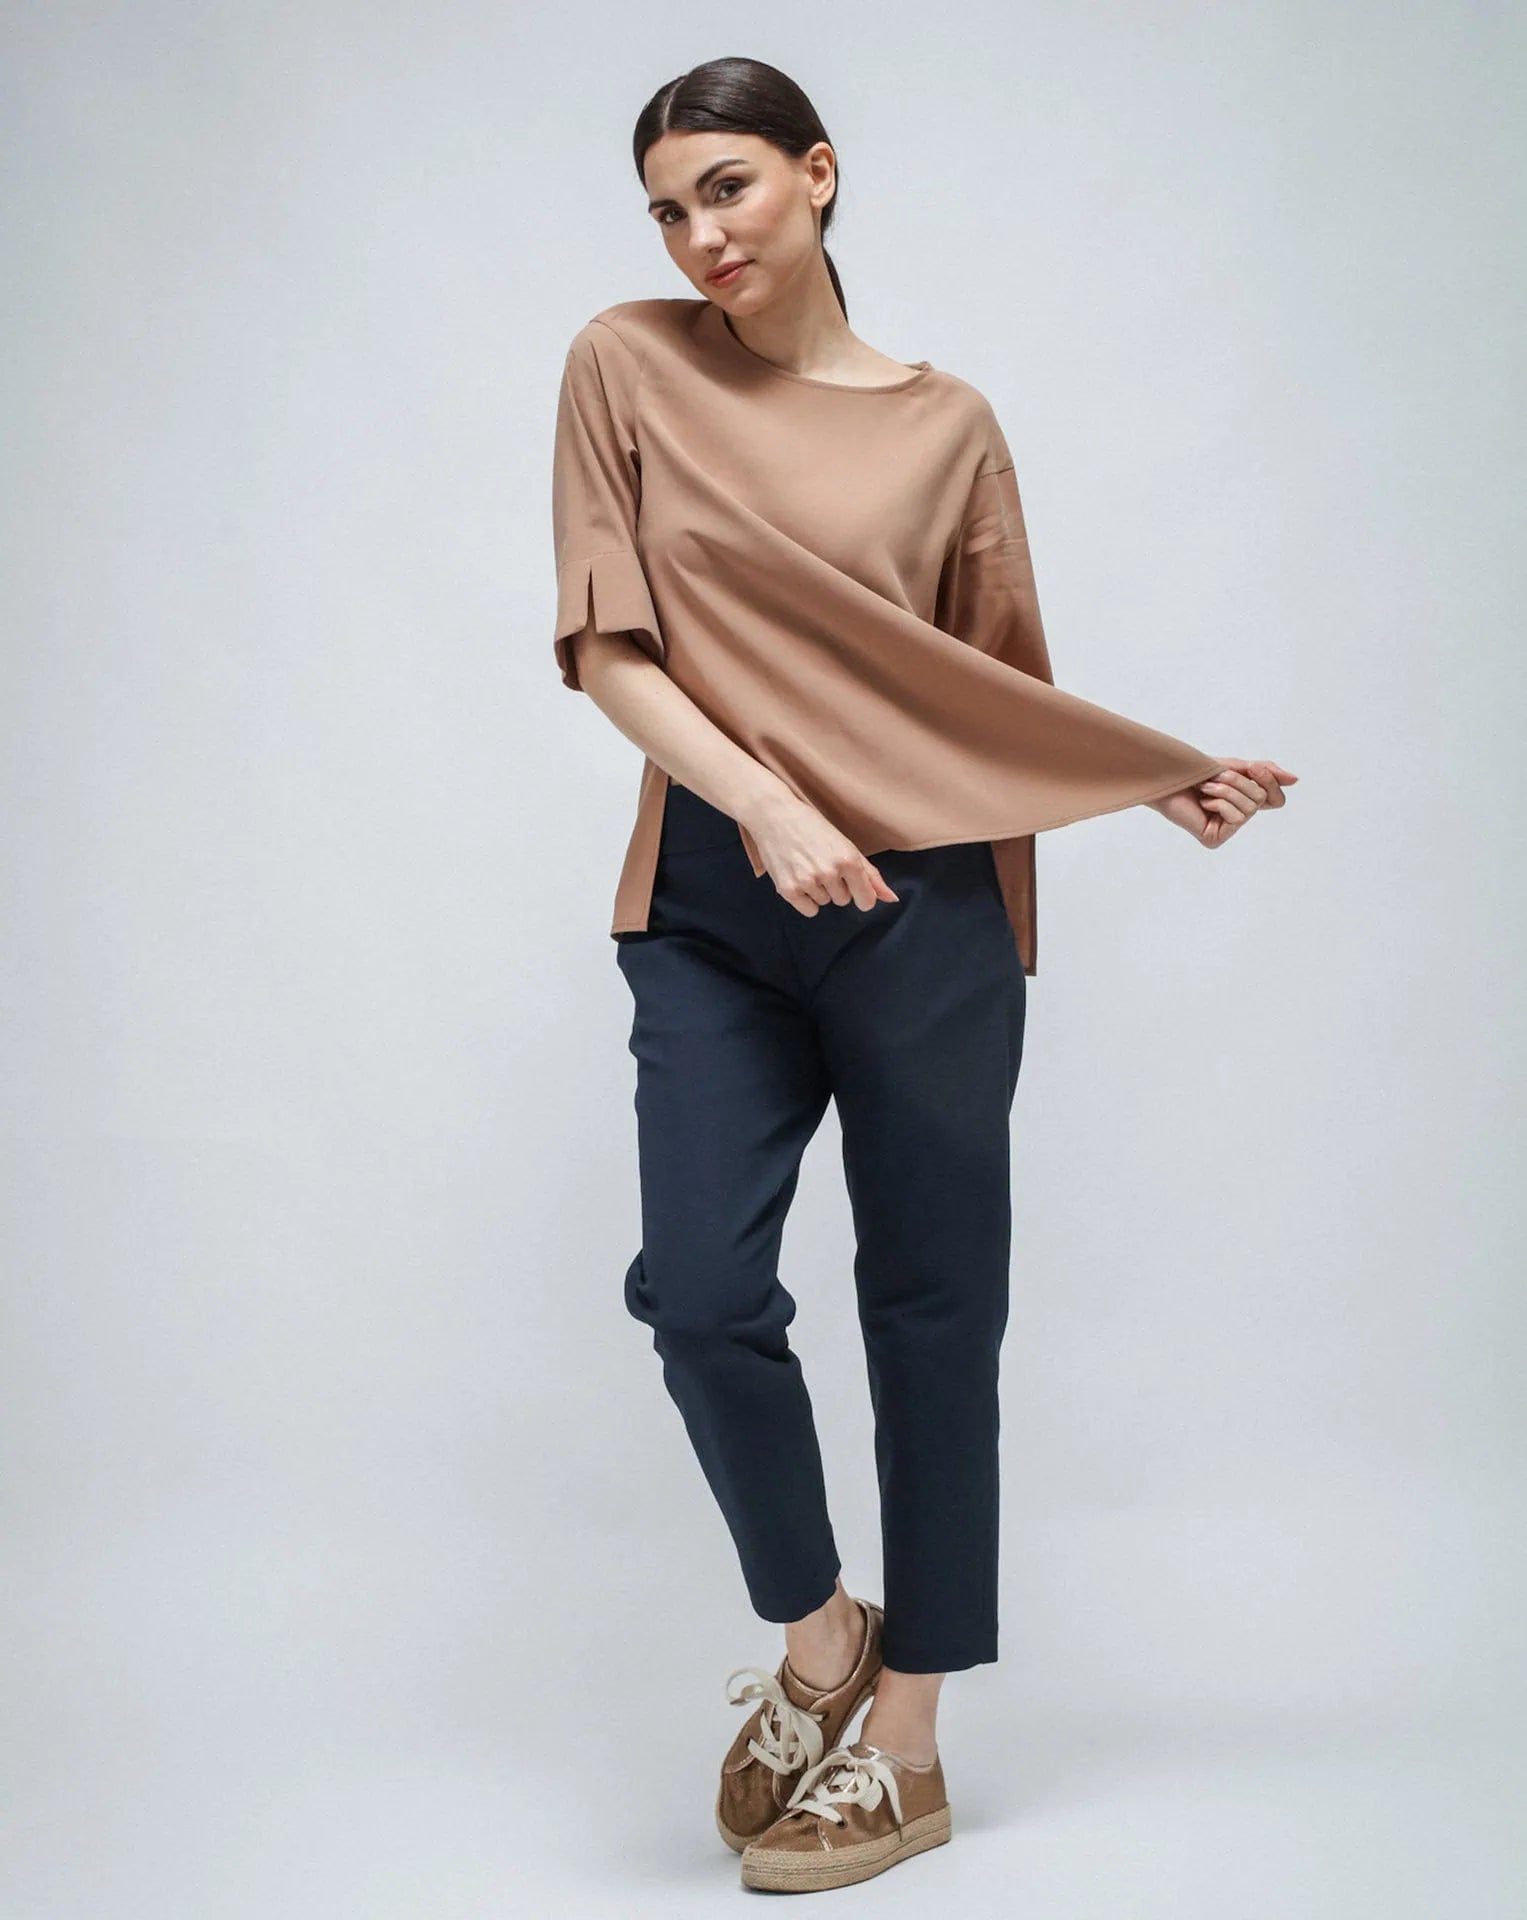 Cupro shirt in nude color